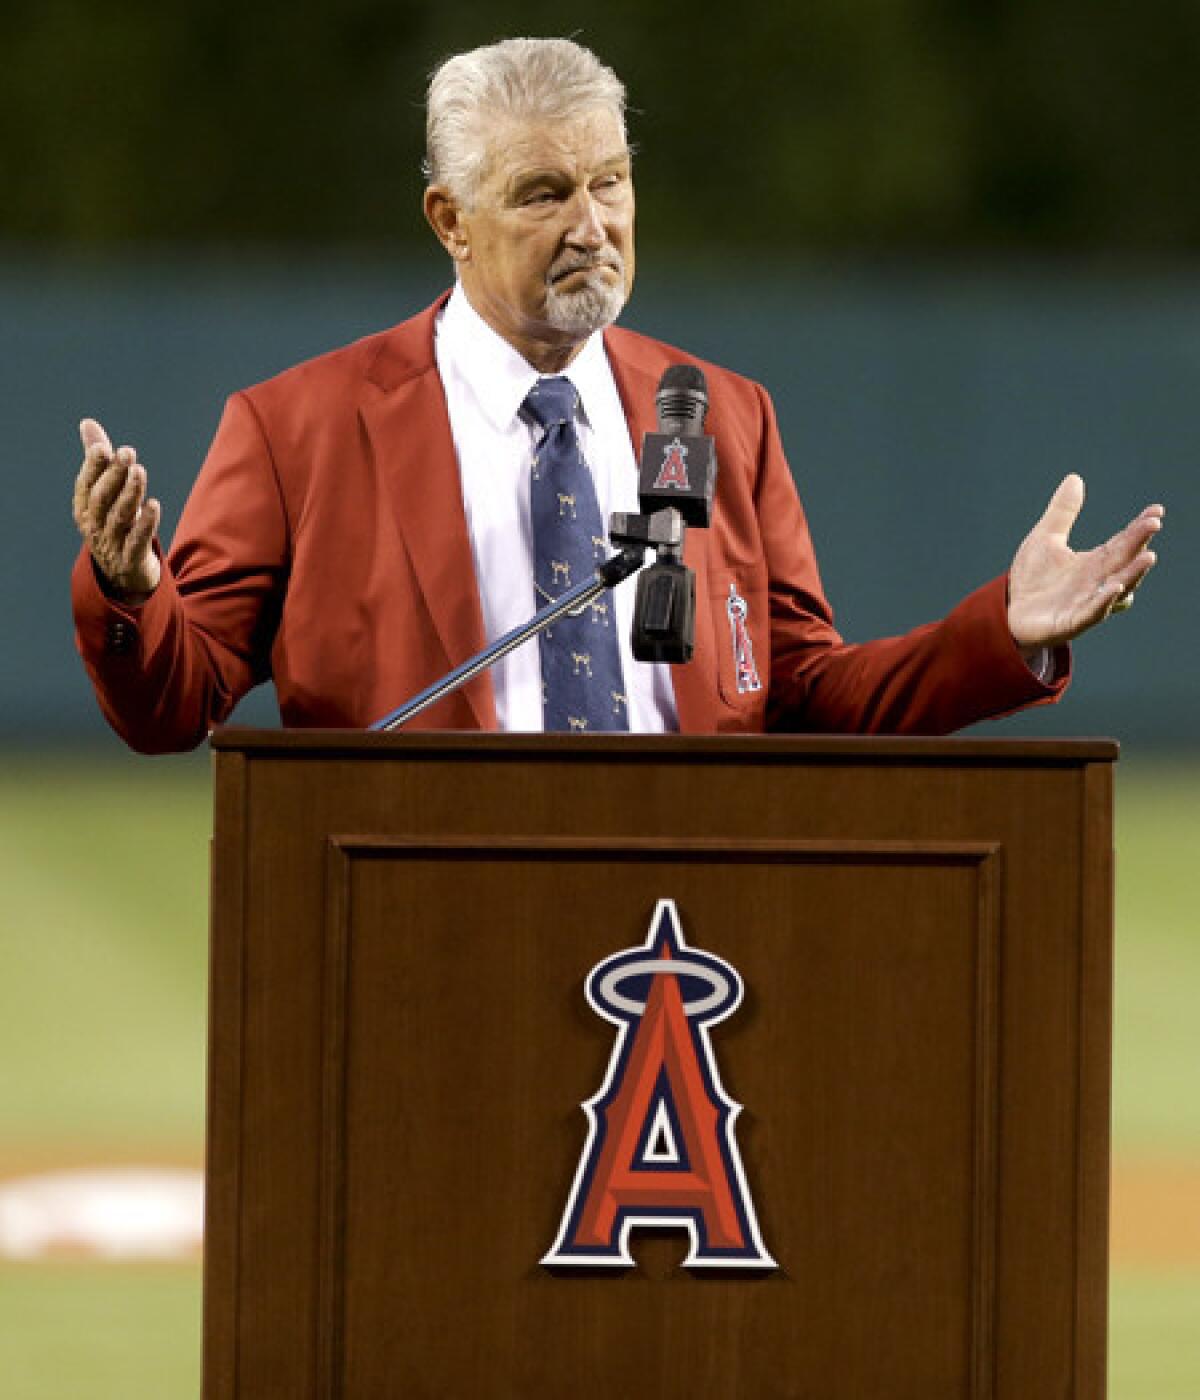 Former Angels second baseman Bobby Knoop speaks during his Hall of Fame induction ceremony Thursday night in Anaheim.